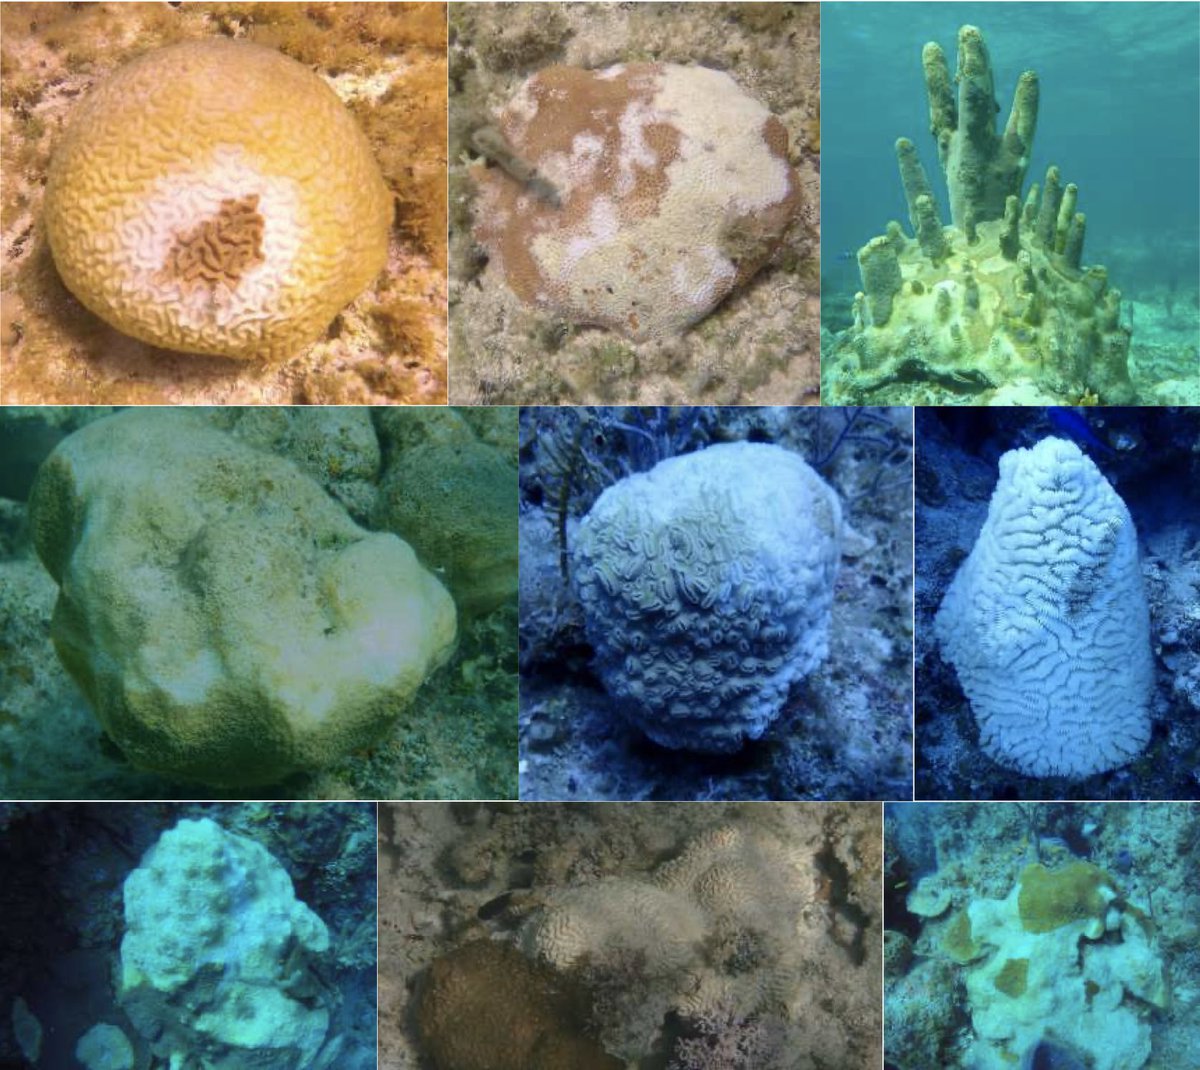 Just want to raise the awareness to everyone- A NEW, rapidly spreading outbreak of stony coral tissue loss disease (SCTLD) has infiltrated nearly 40 miles of Grand Bahama’s southern coastline, killing a wide range of corals, including some that are already endangered.